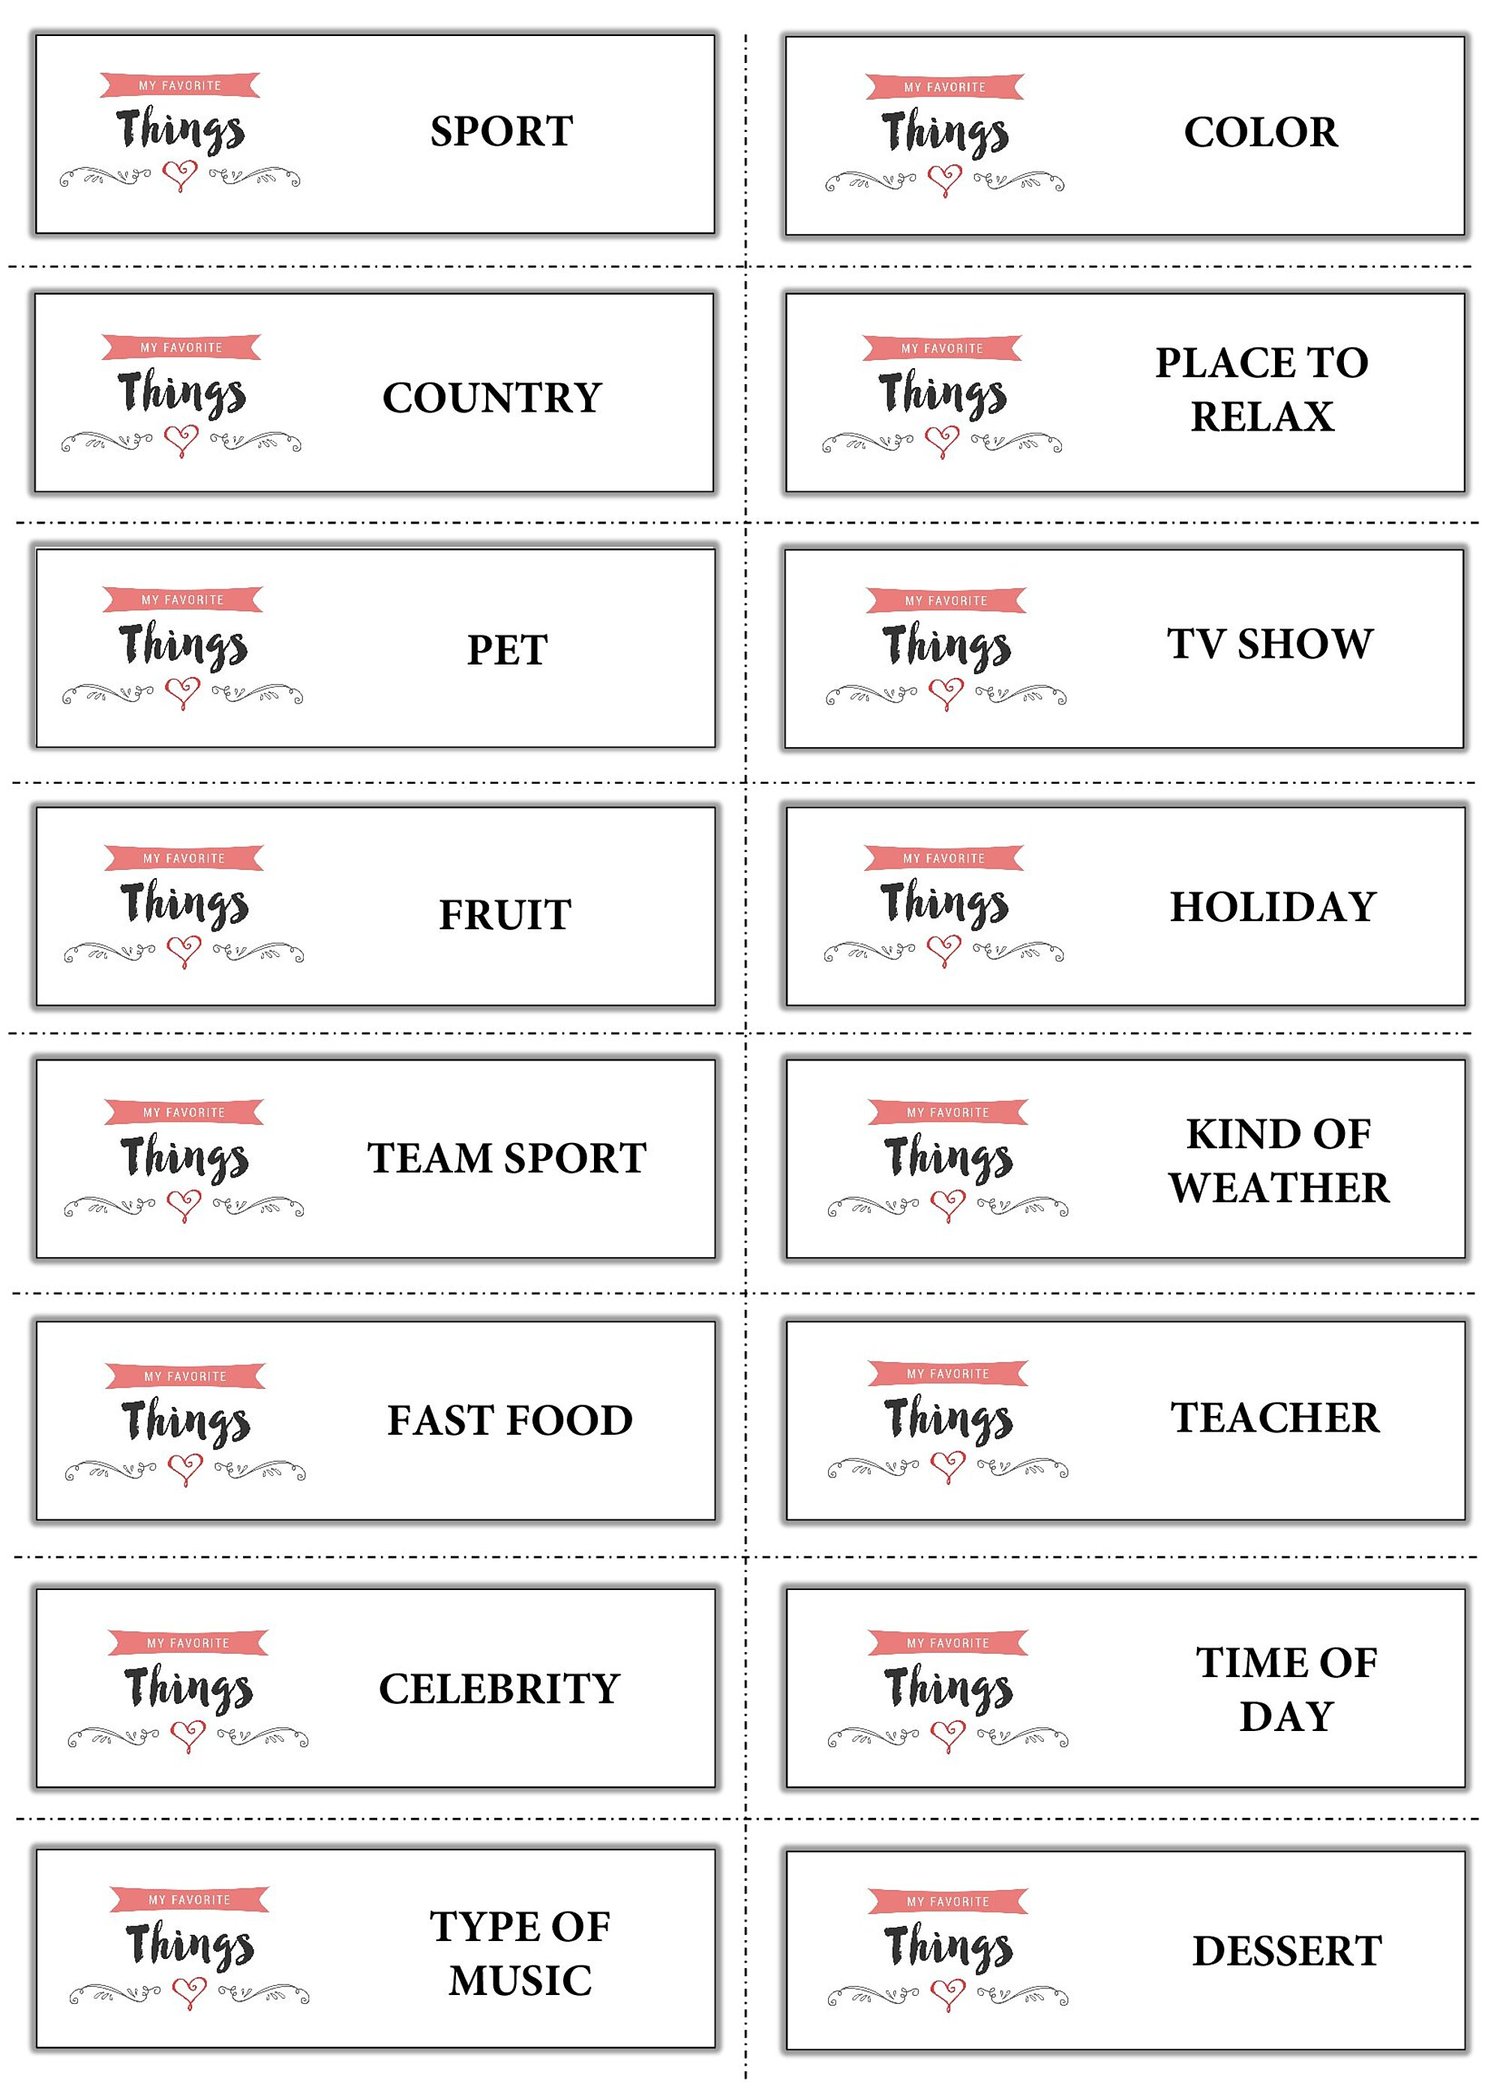 My Favorite Things Worksheet by Rush and Ramble